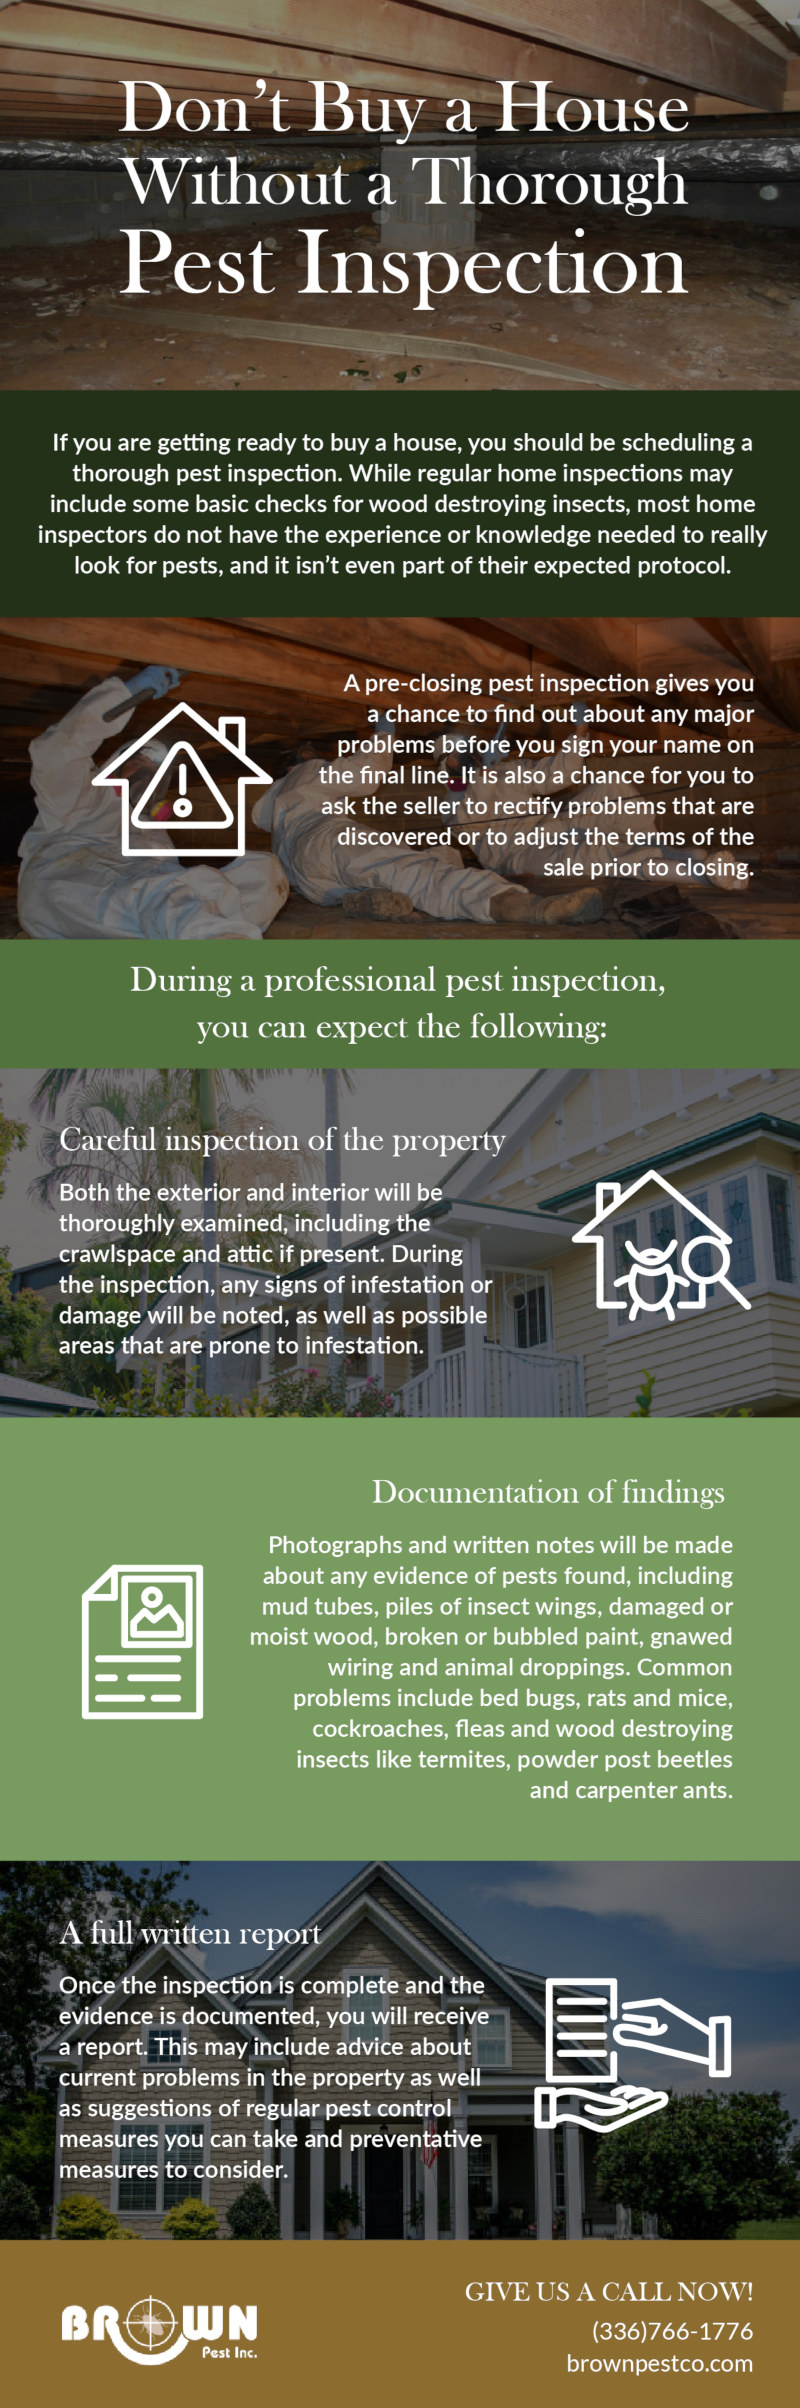 Thorough Pest Inspection Infographic